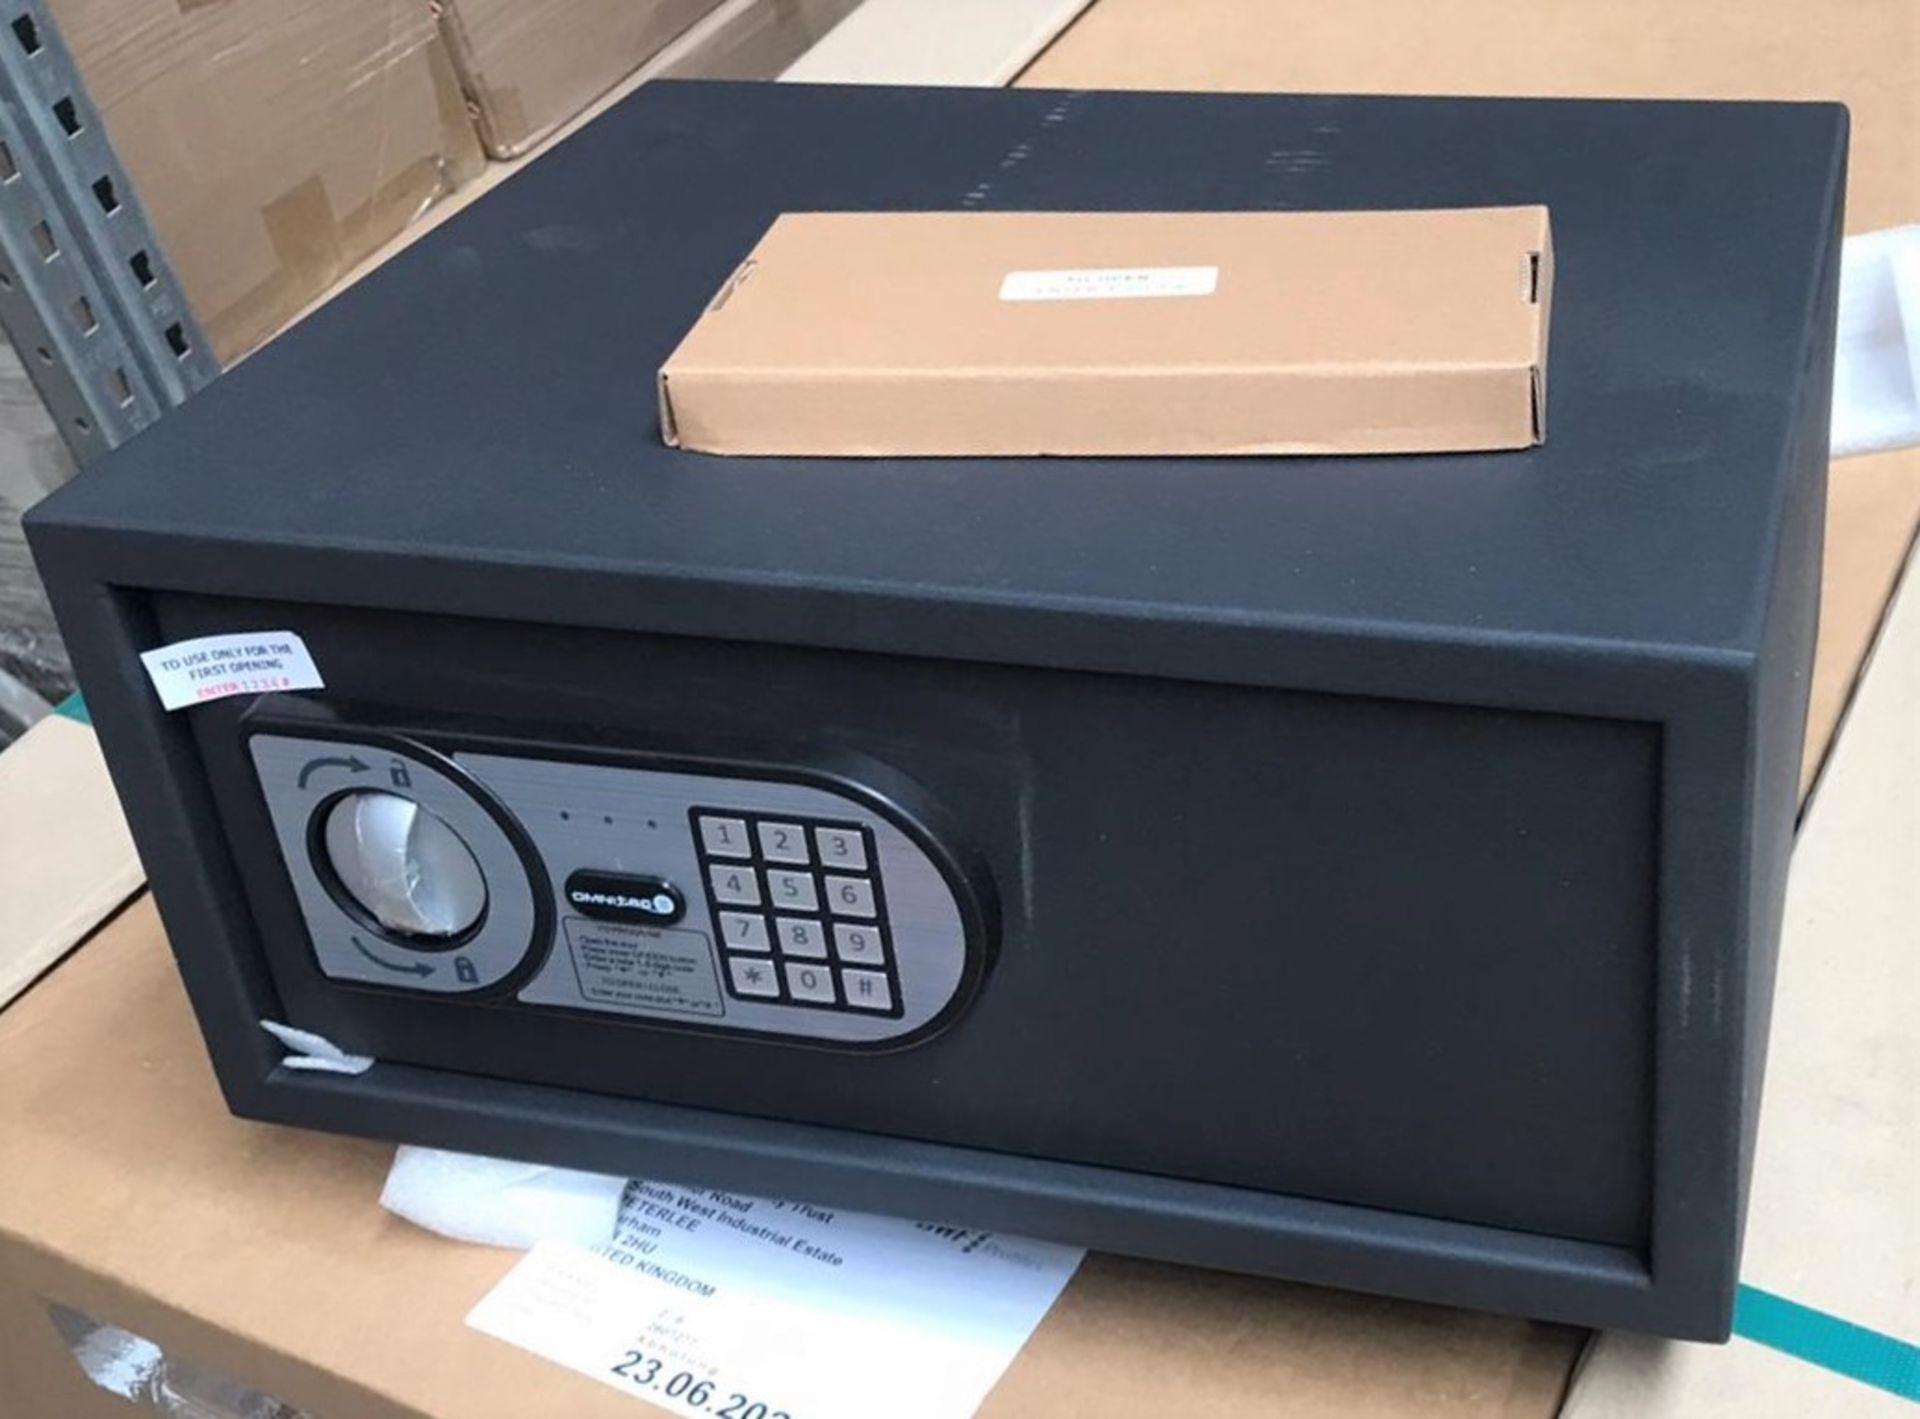 1 x Omnitec Safeguard Security Safe With Keypad Opening - Model Laptop 15 - Size H20 x W43 x D35 cms - Image 5 of 6